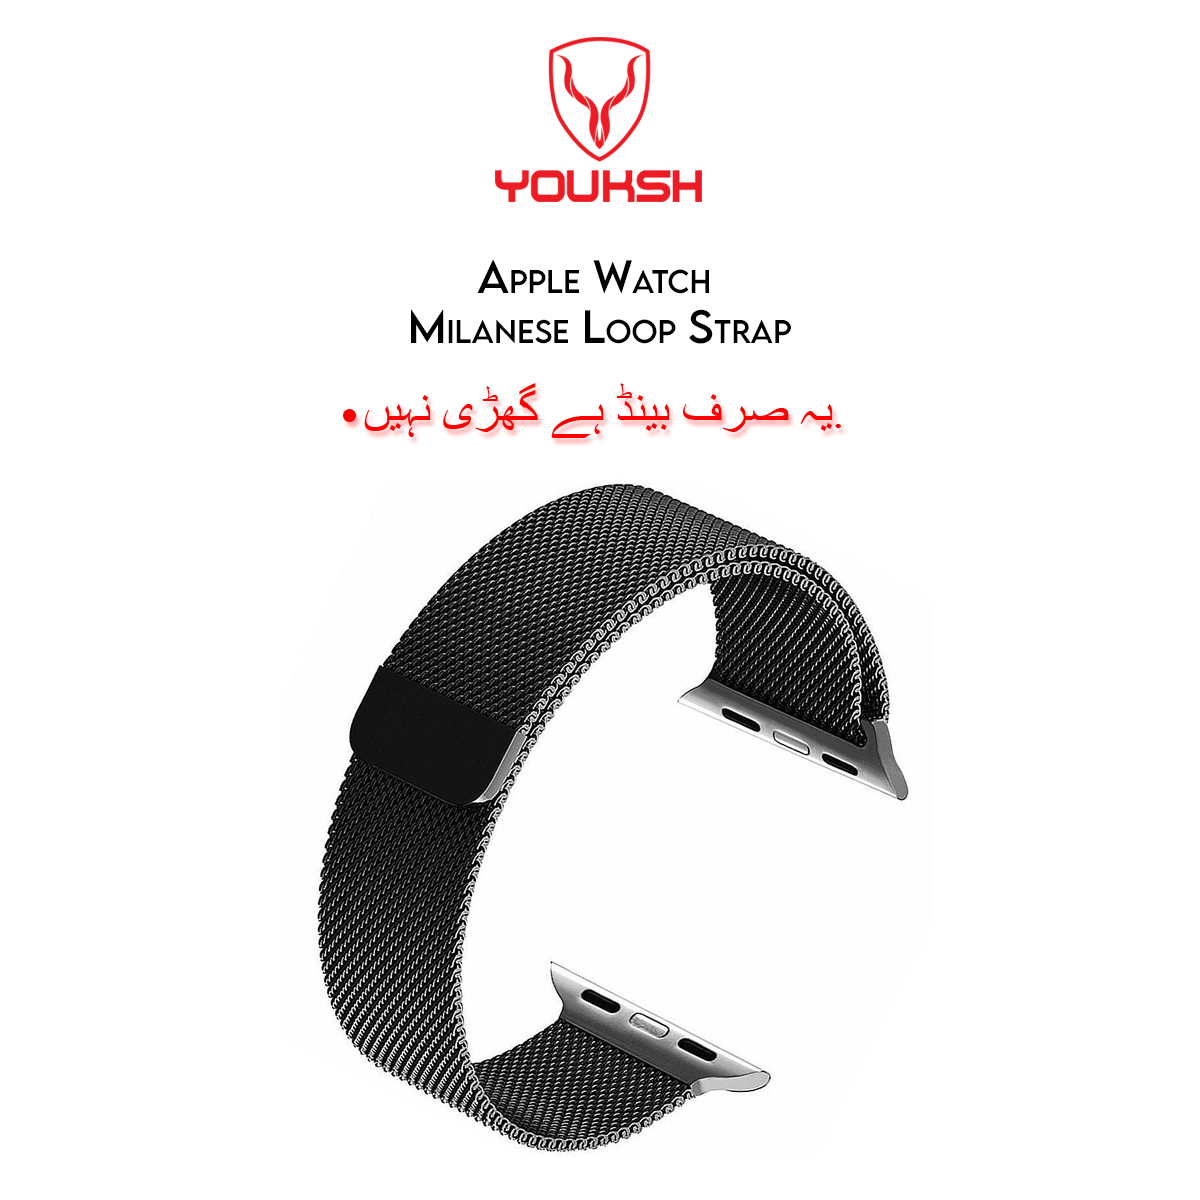 YOUKSH Apple Watch - Milanese Stainless Steel - Strap - 38mm/40mm,For Apple Watch Series 1/2/3/4/5/6.